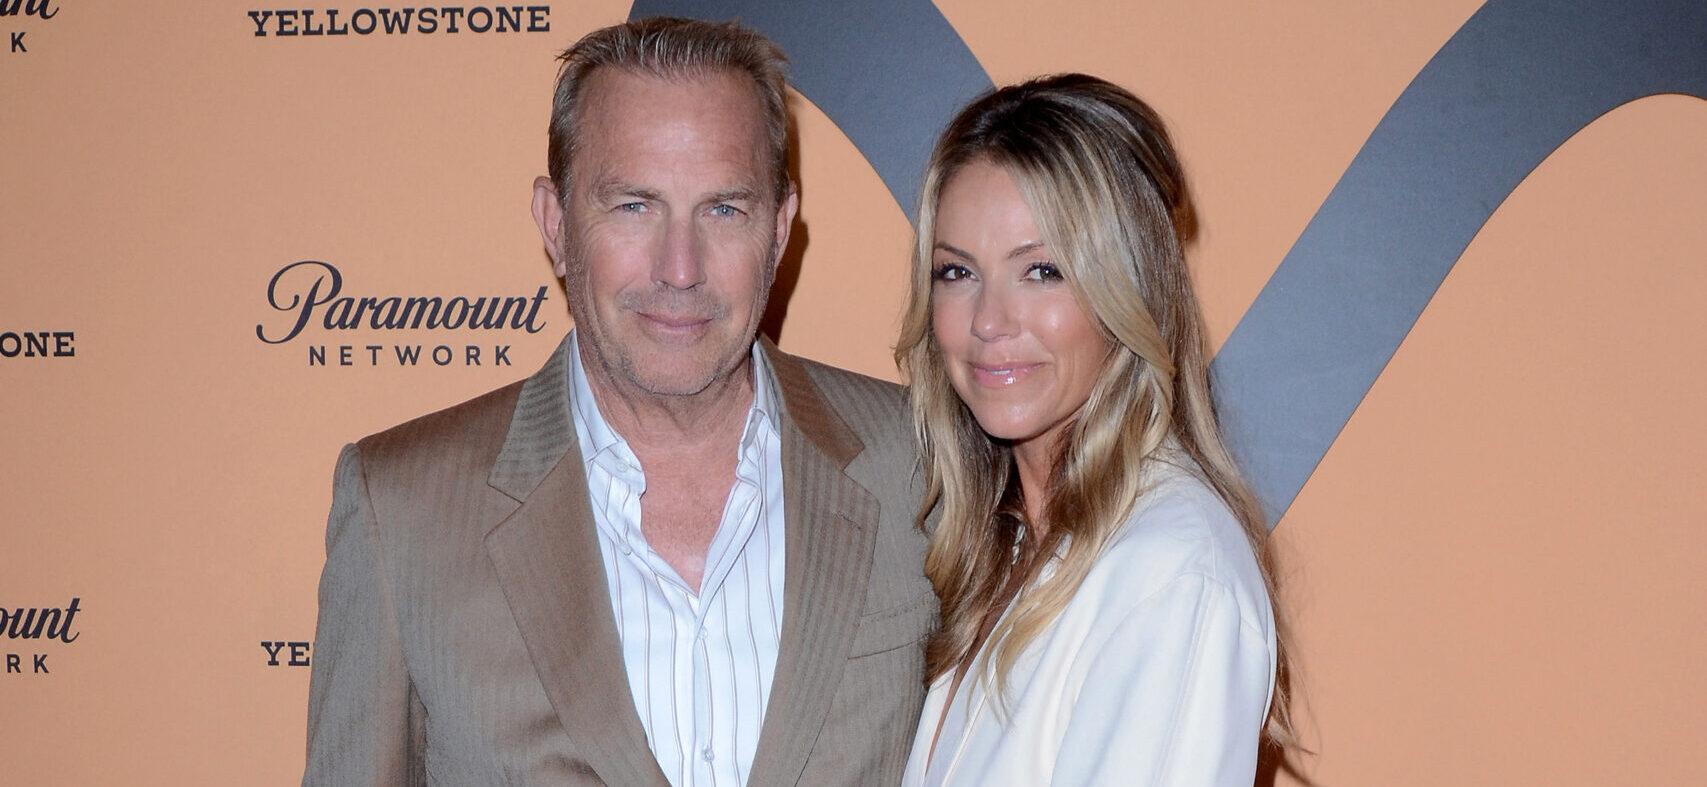 Kevin Costner’s Wife Files For Divorce To End 18-Year Marriage With No Spousal Support